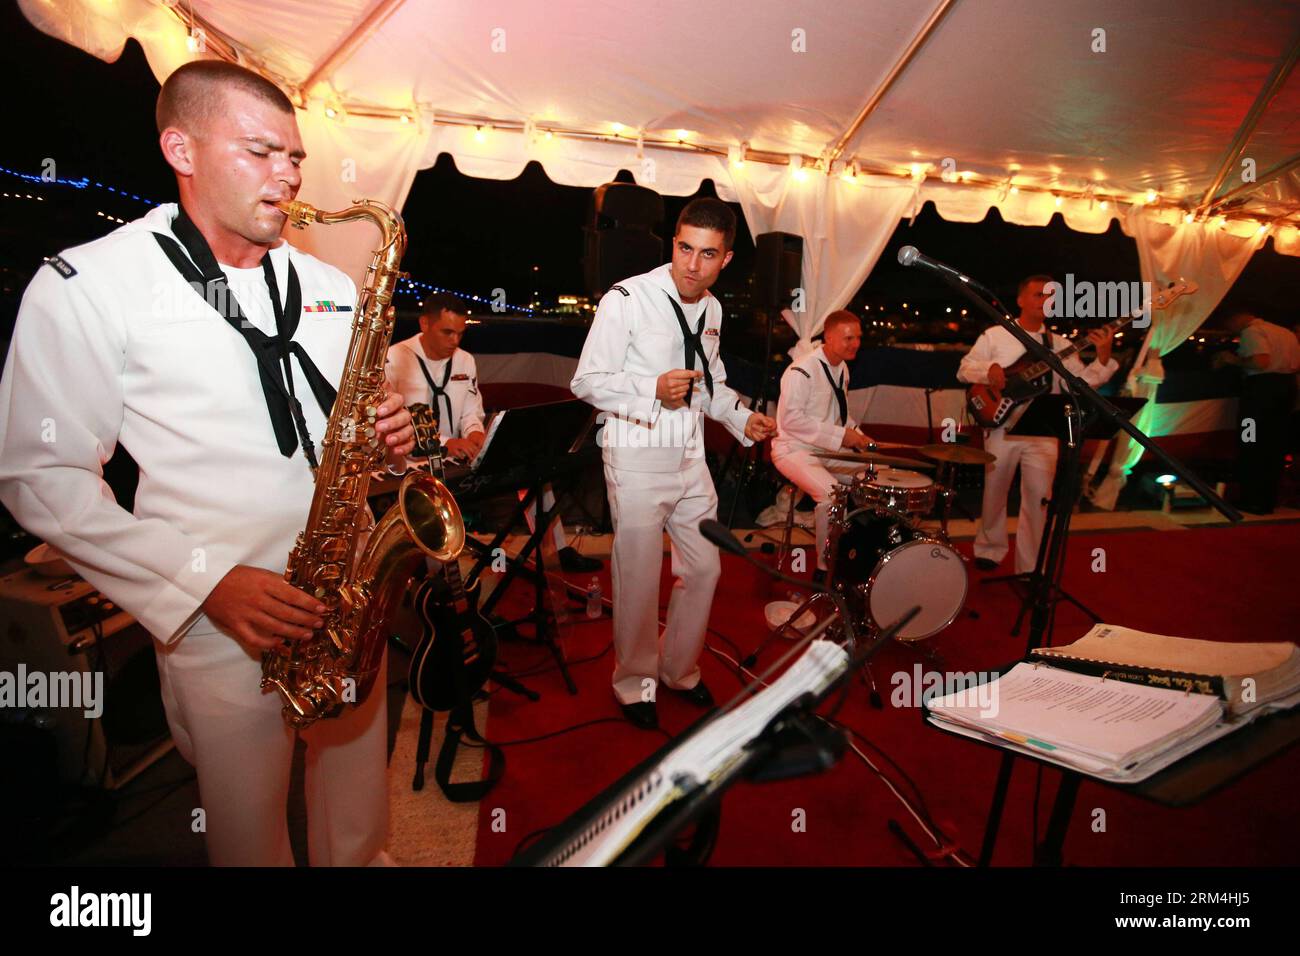 Bildnummer: 60466120  Datum: 08.09.2013  Copyright: imago/Xinhua (130912) -- HAWAII,   -- A band plays music on the USS Lake Eriea at the Pearl Harbor in Hawaii, the United States, Sept. 8, 2013. Pearl Harbor is located on the island of Oahu, Hawaii, west of Honolulu. Much of the harbor and surrounding lands is a United States navy deep-water naval base. It is also the headquarters of the United States Pacific Fleet. (Xinhua/Zha Chunming) (axy) U.S.-HAWAII-PEARL HARBOR PUBLICATIONxNOTxINxCHN Militär Marine xas x0x 2013 quer     60466120 Date 08 09 2013 Copyright Imago XINHUA  Hawaii a Tie PLAY Stock Photo